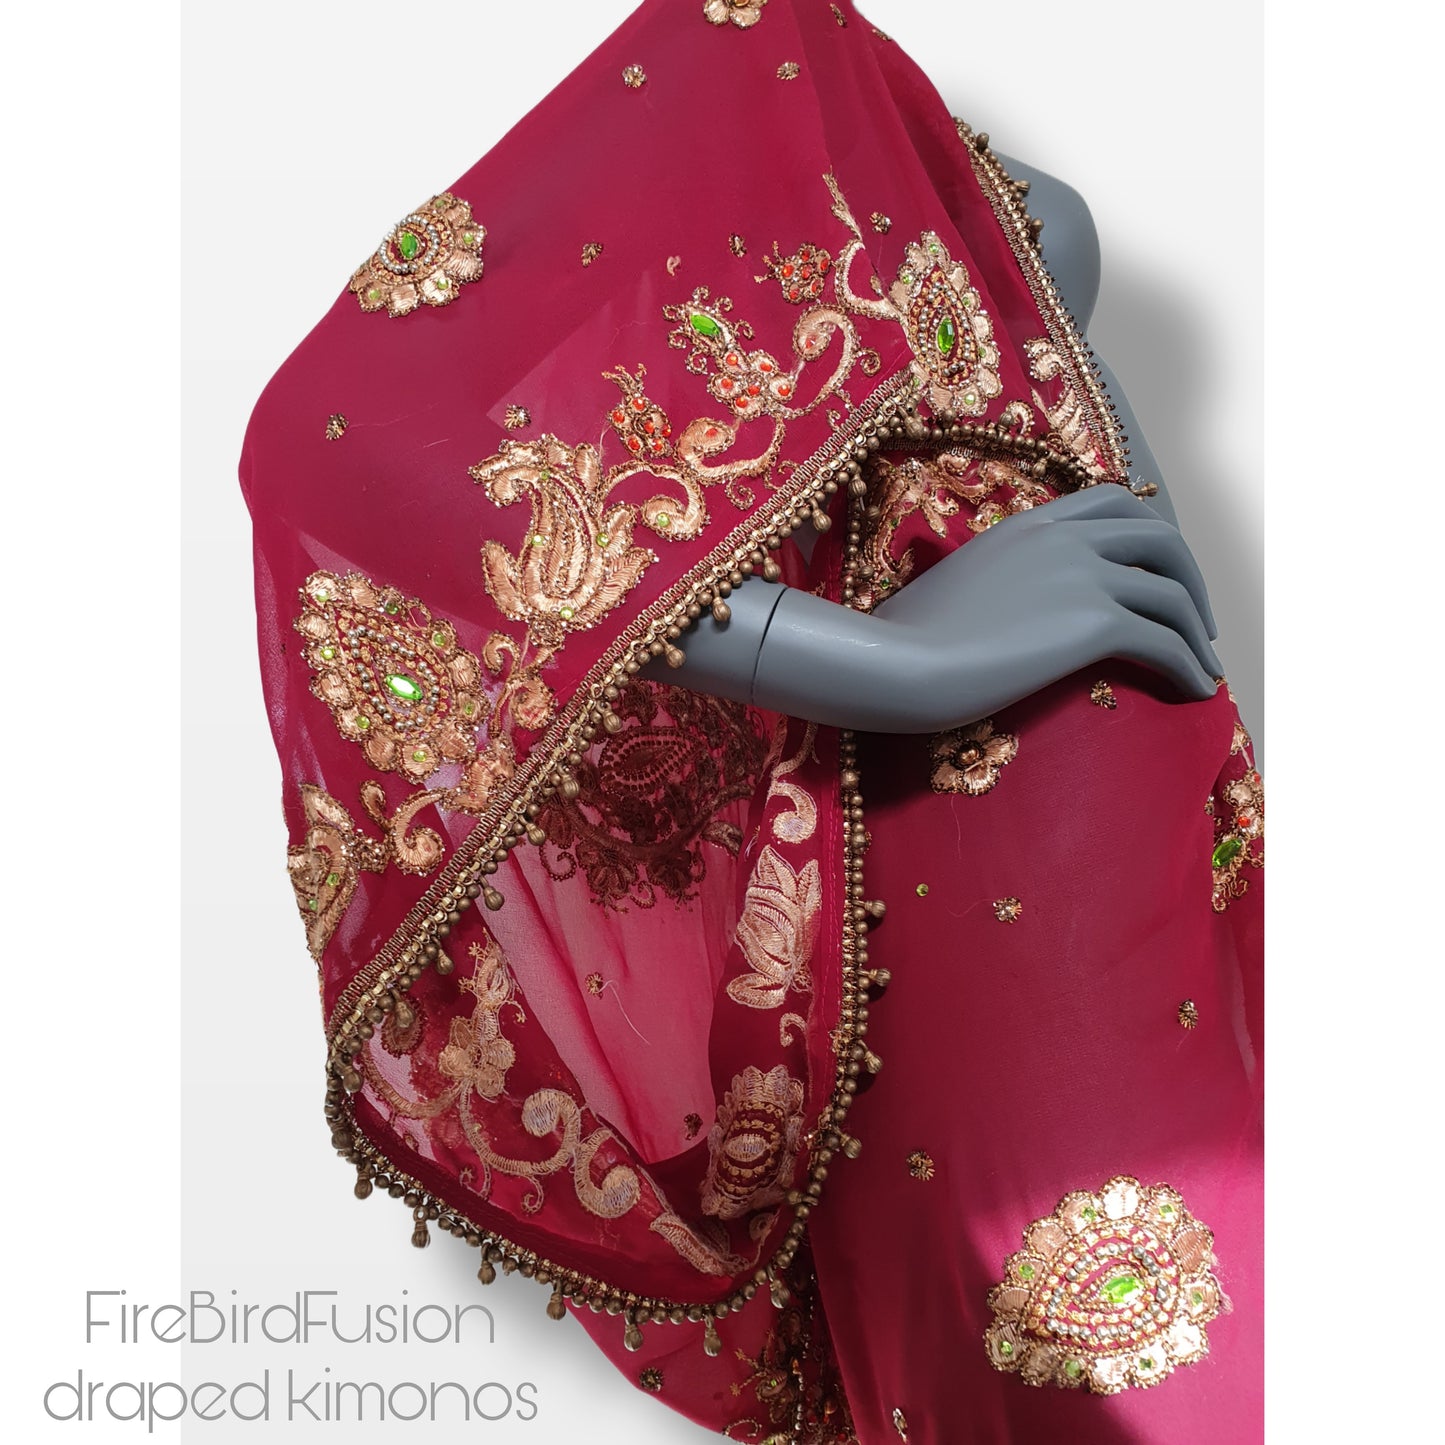 Draped kimono, dark red with elaborated embrodery and beaded trim (L)